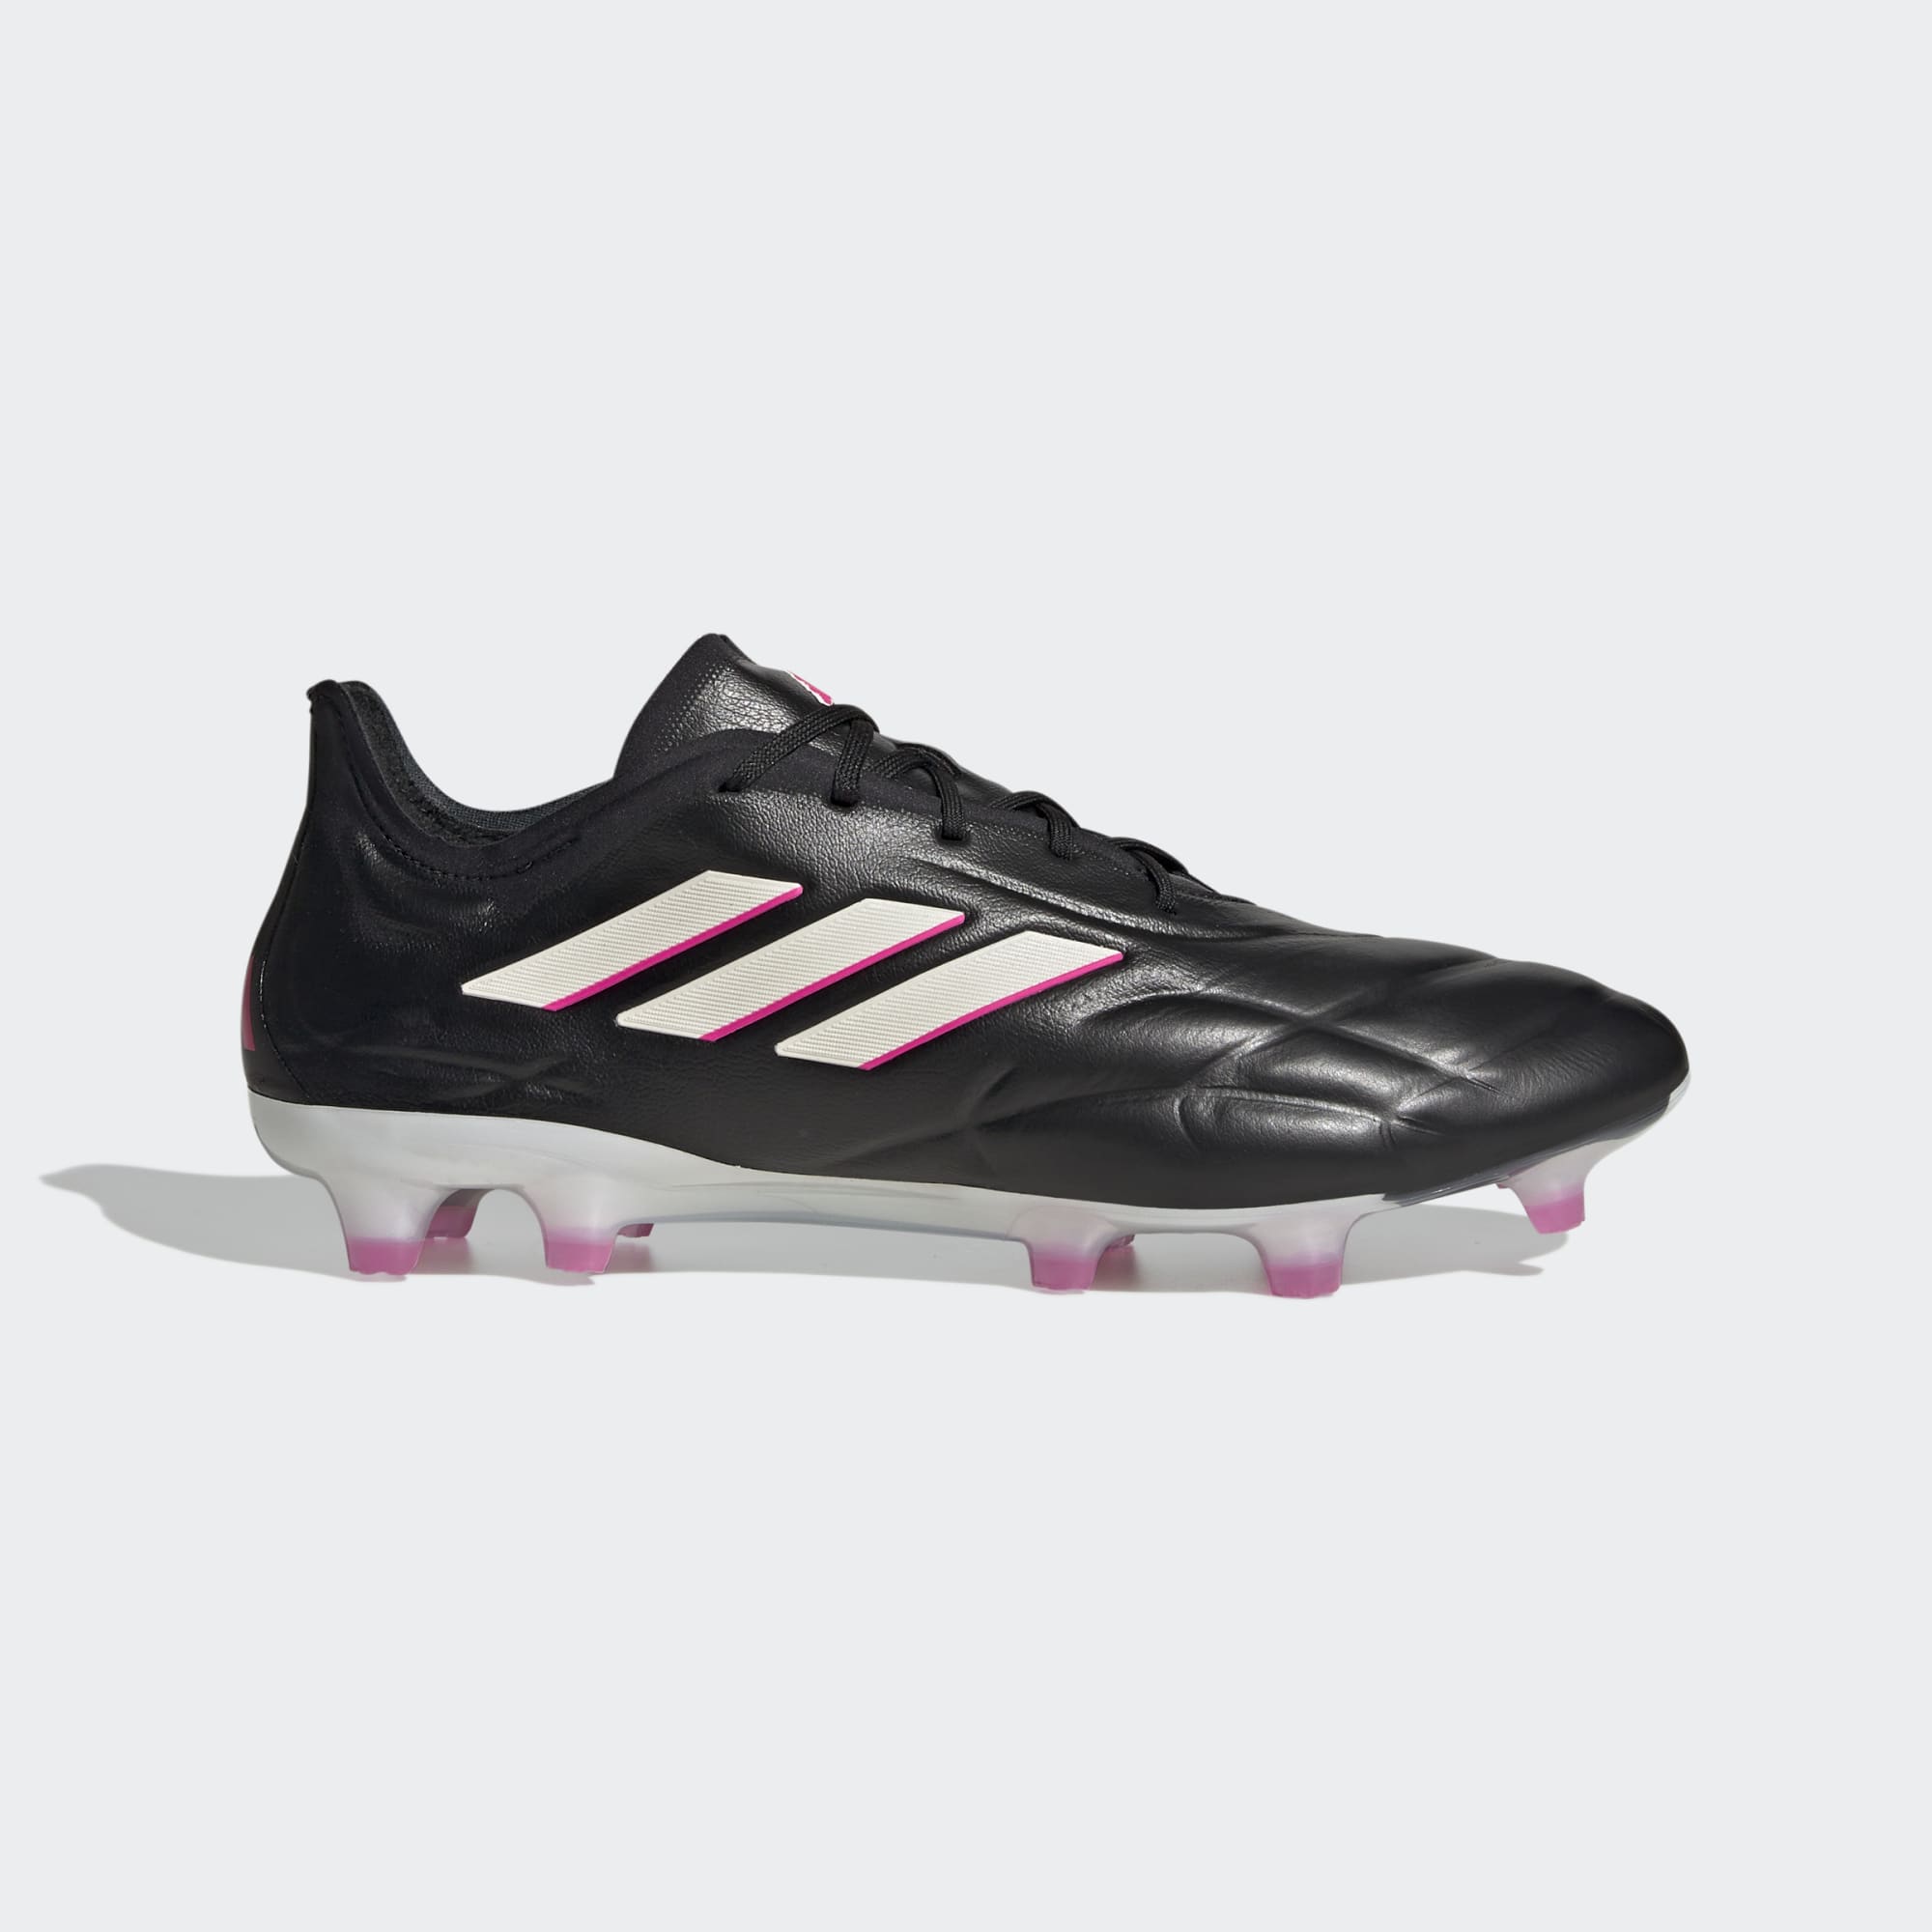 occidental Dios Copiar Stefans Soccer - Wisconsin - adidas Copa Pure.1 Firm Ground Cleats - Core  Black / Zero Metalic / Team Shock Pink 2